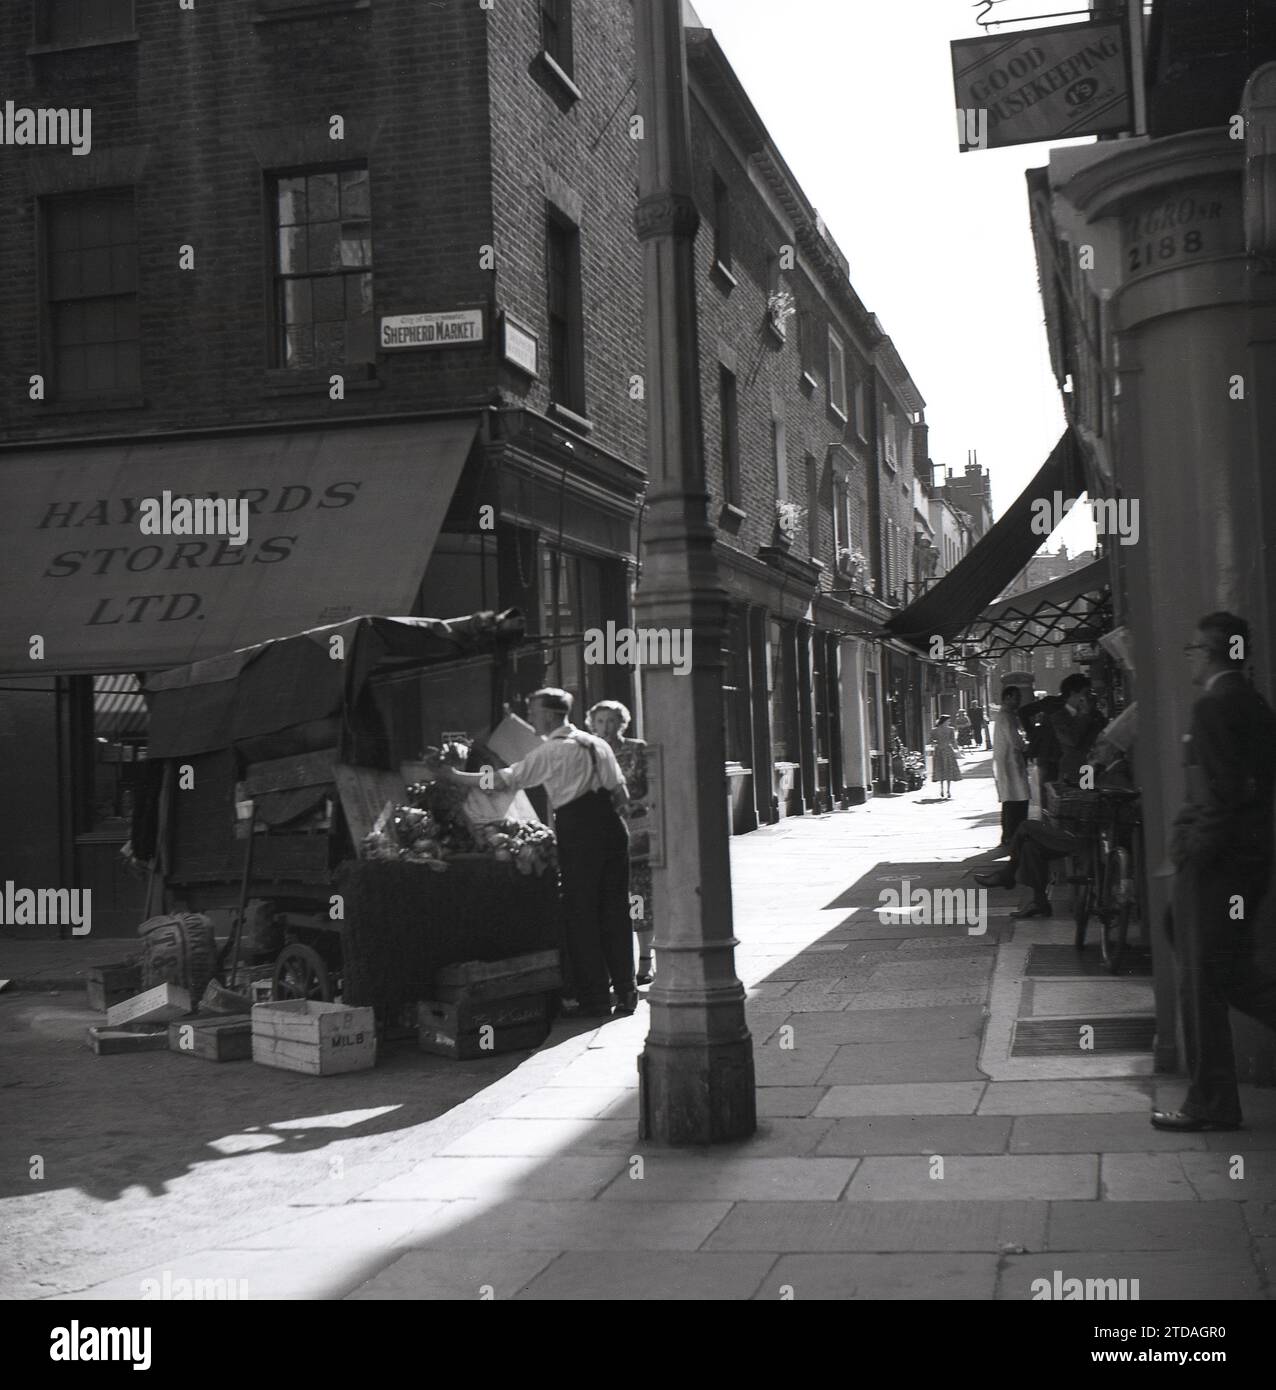 1950s, historical, a female shopper with a male trader at market stall, Shepherd Market, in Mayfair, London, England, UK. On the corner of the paved alleyway, Hayward Stores and a sign for Good Housing Keeping magazine at 1'9 a month. Located in Mayfair off Piccadilly, Shepherd Market is a charming part of central London with its small square and narrow side streets, being known as a 'village in Piccadilly'. Stock Photo